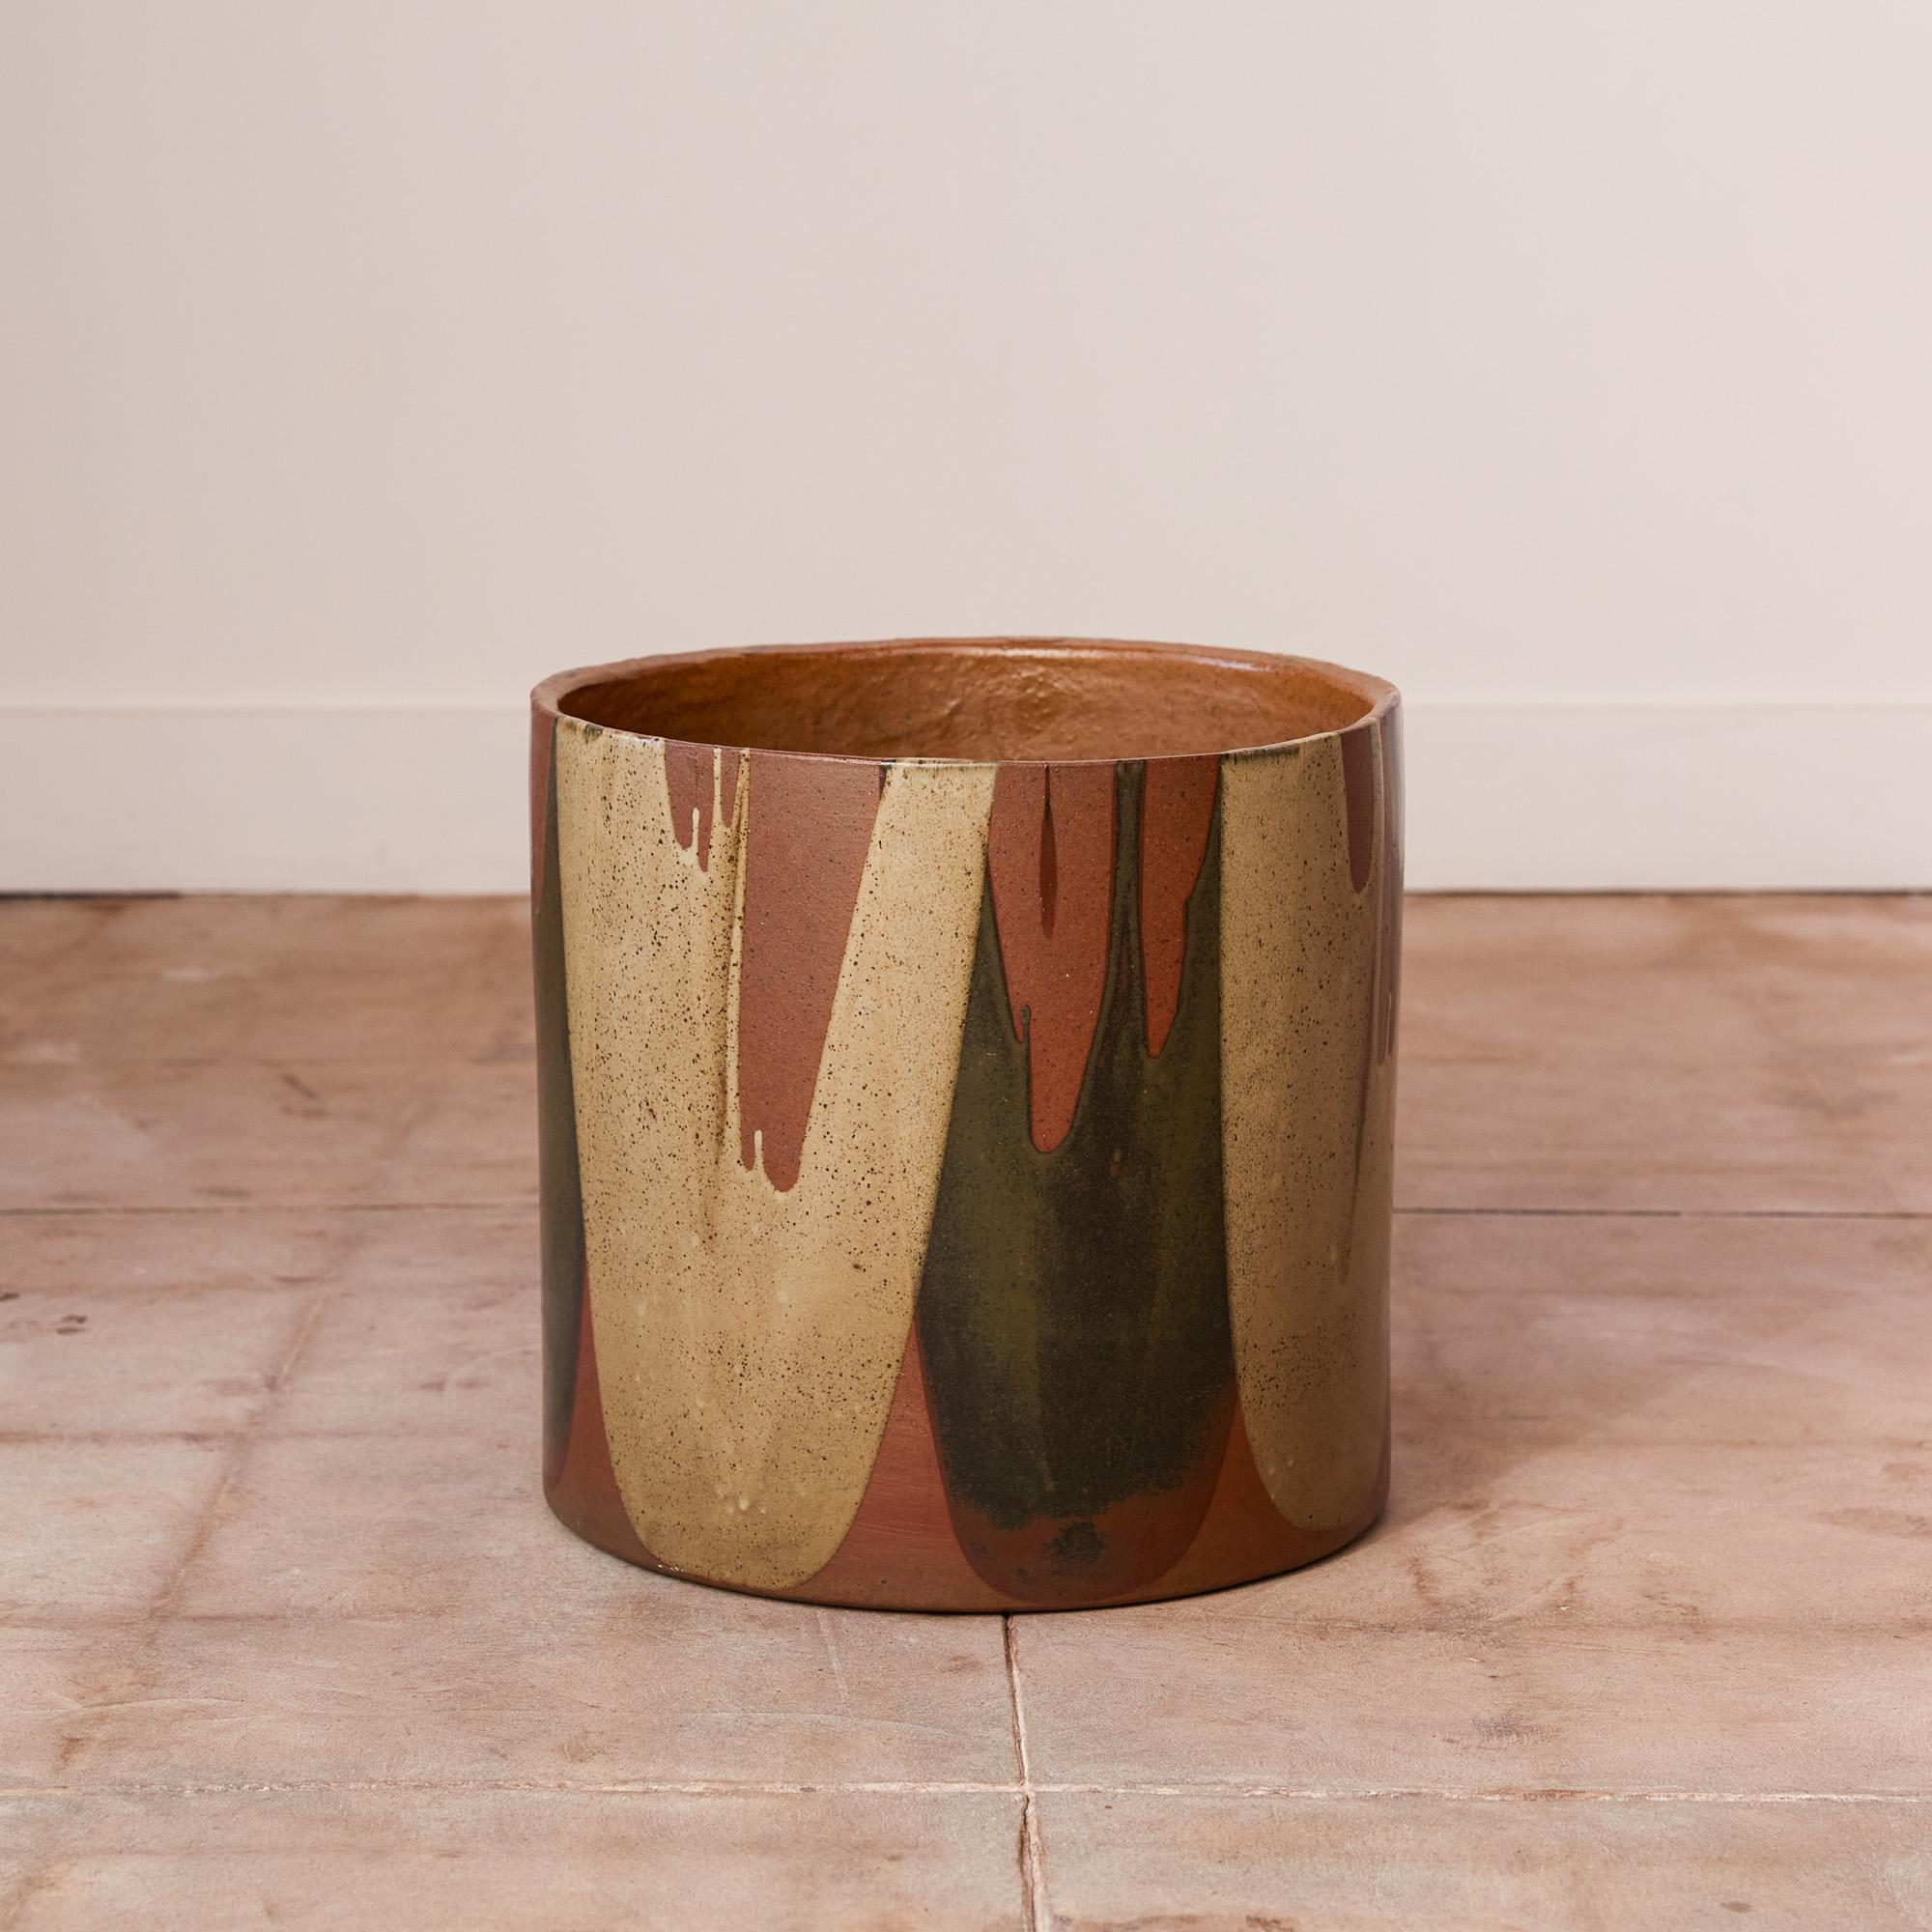 A planter by David Cressey for the Pro/Artisan collection by Architectural Pottery with Cressey’s signature “Flame Glaze.” This planter has a cylindrical body, a simple shape rendered dramatic by the variegated glaze pattern where drip lines